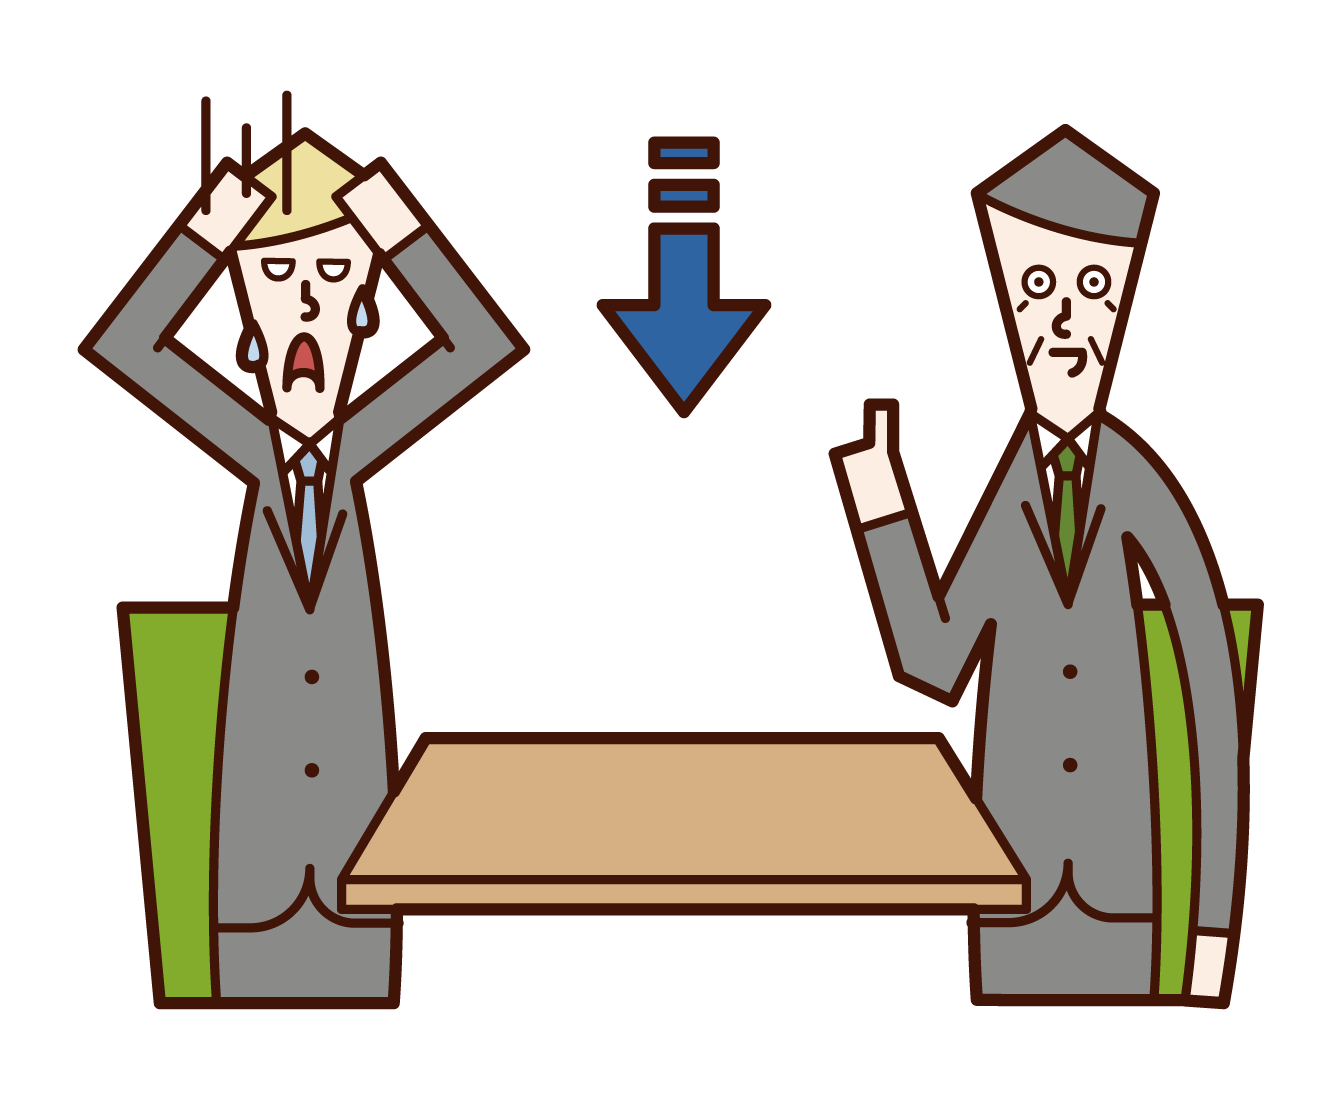 Illustration of a person (male) who receives a low rating in a company interview